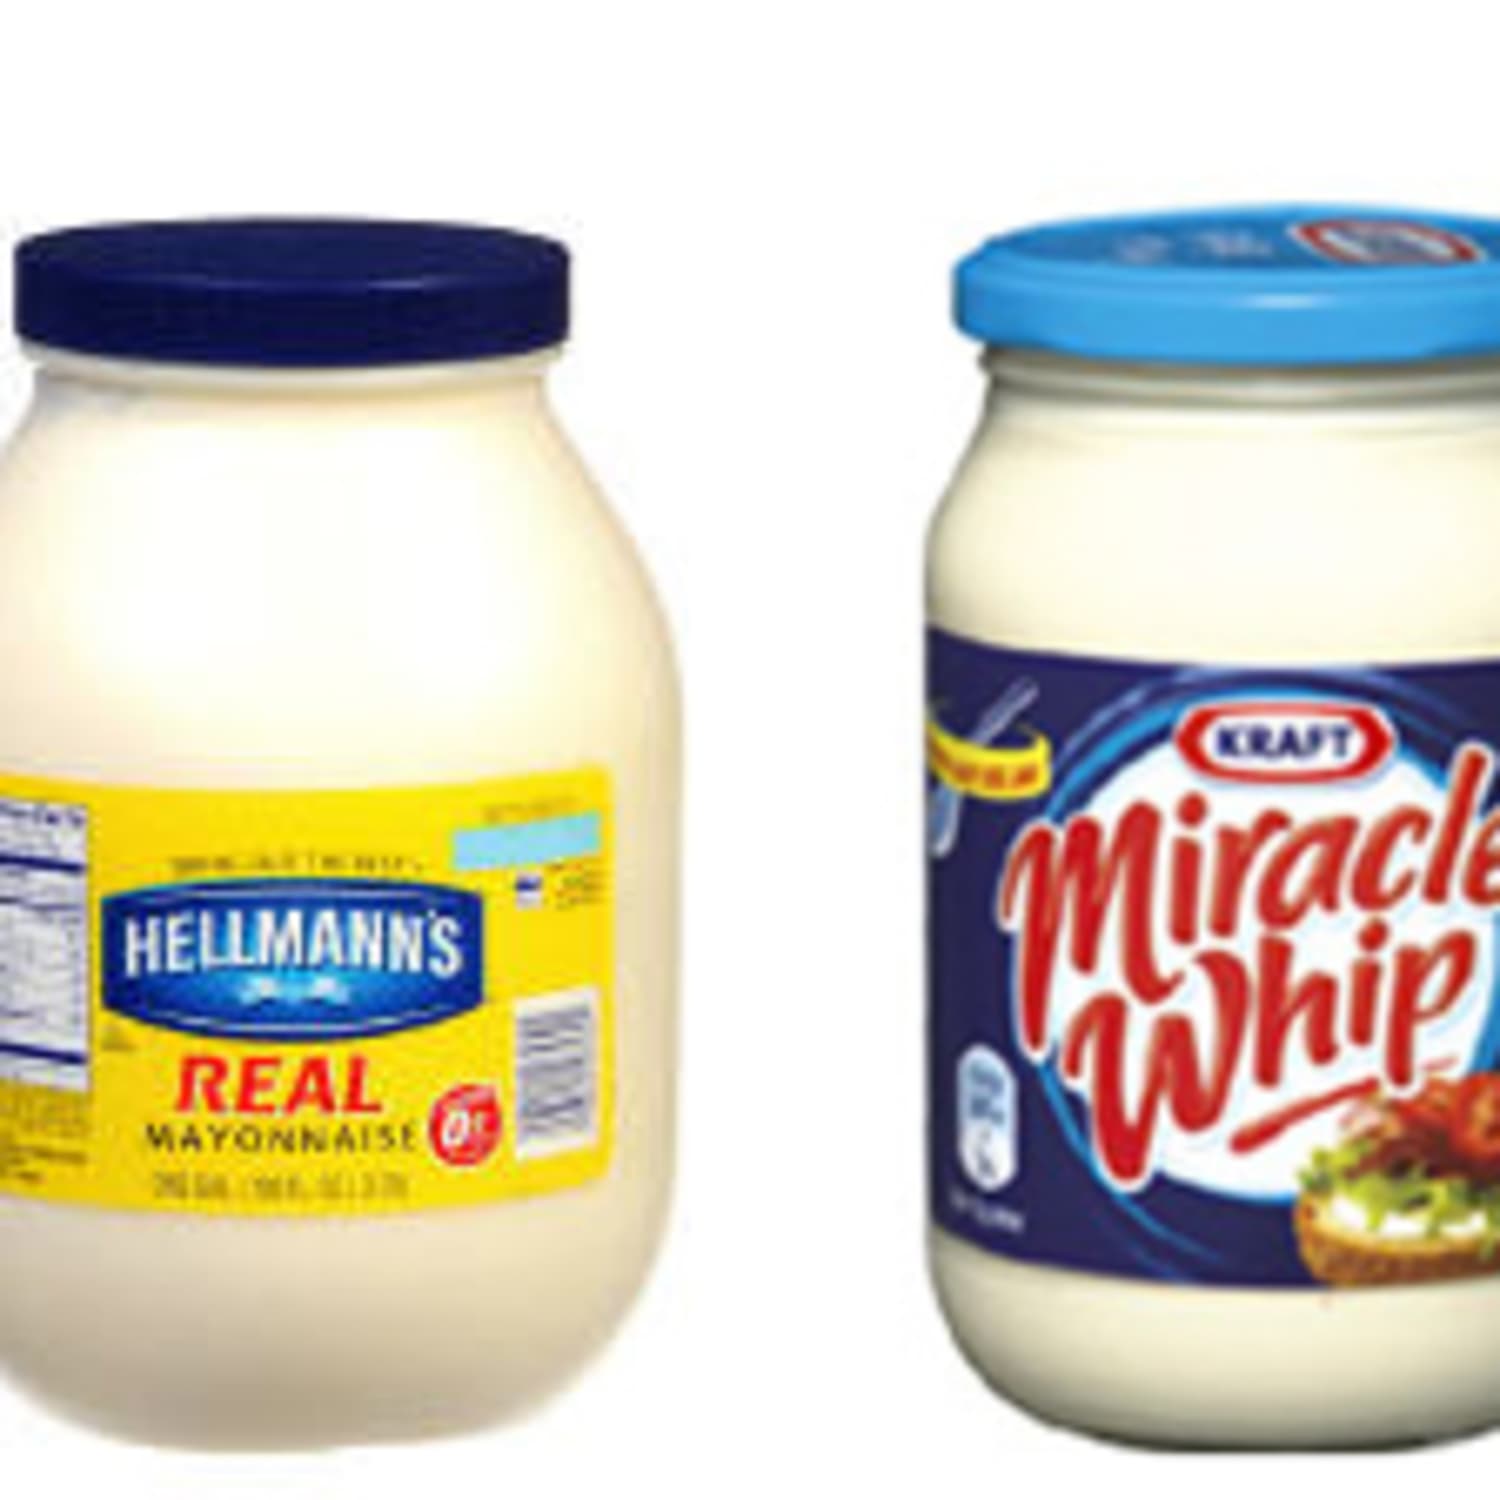 low carb diet miracle whip vs. mayo